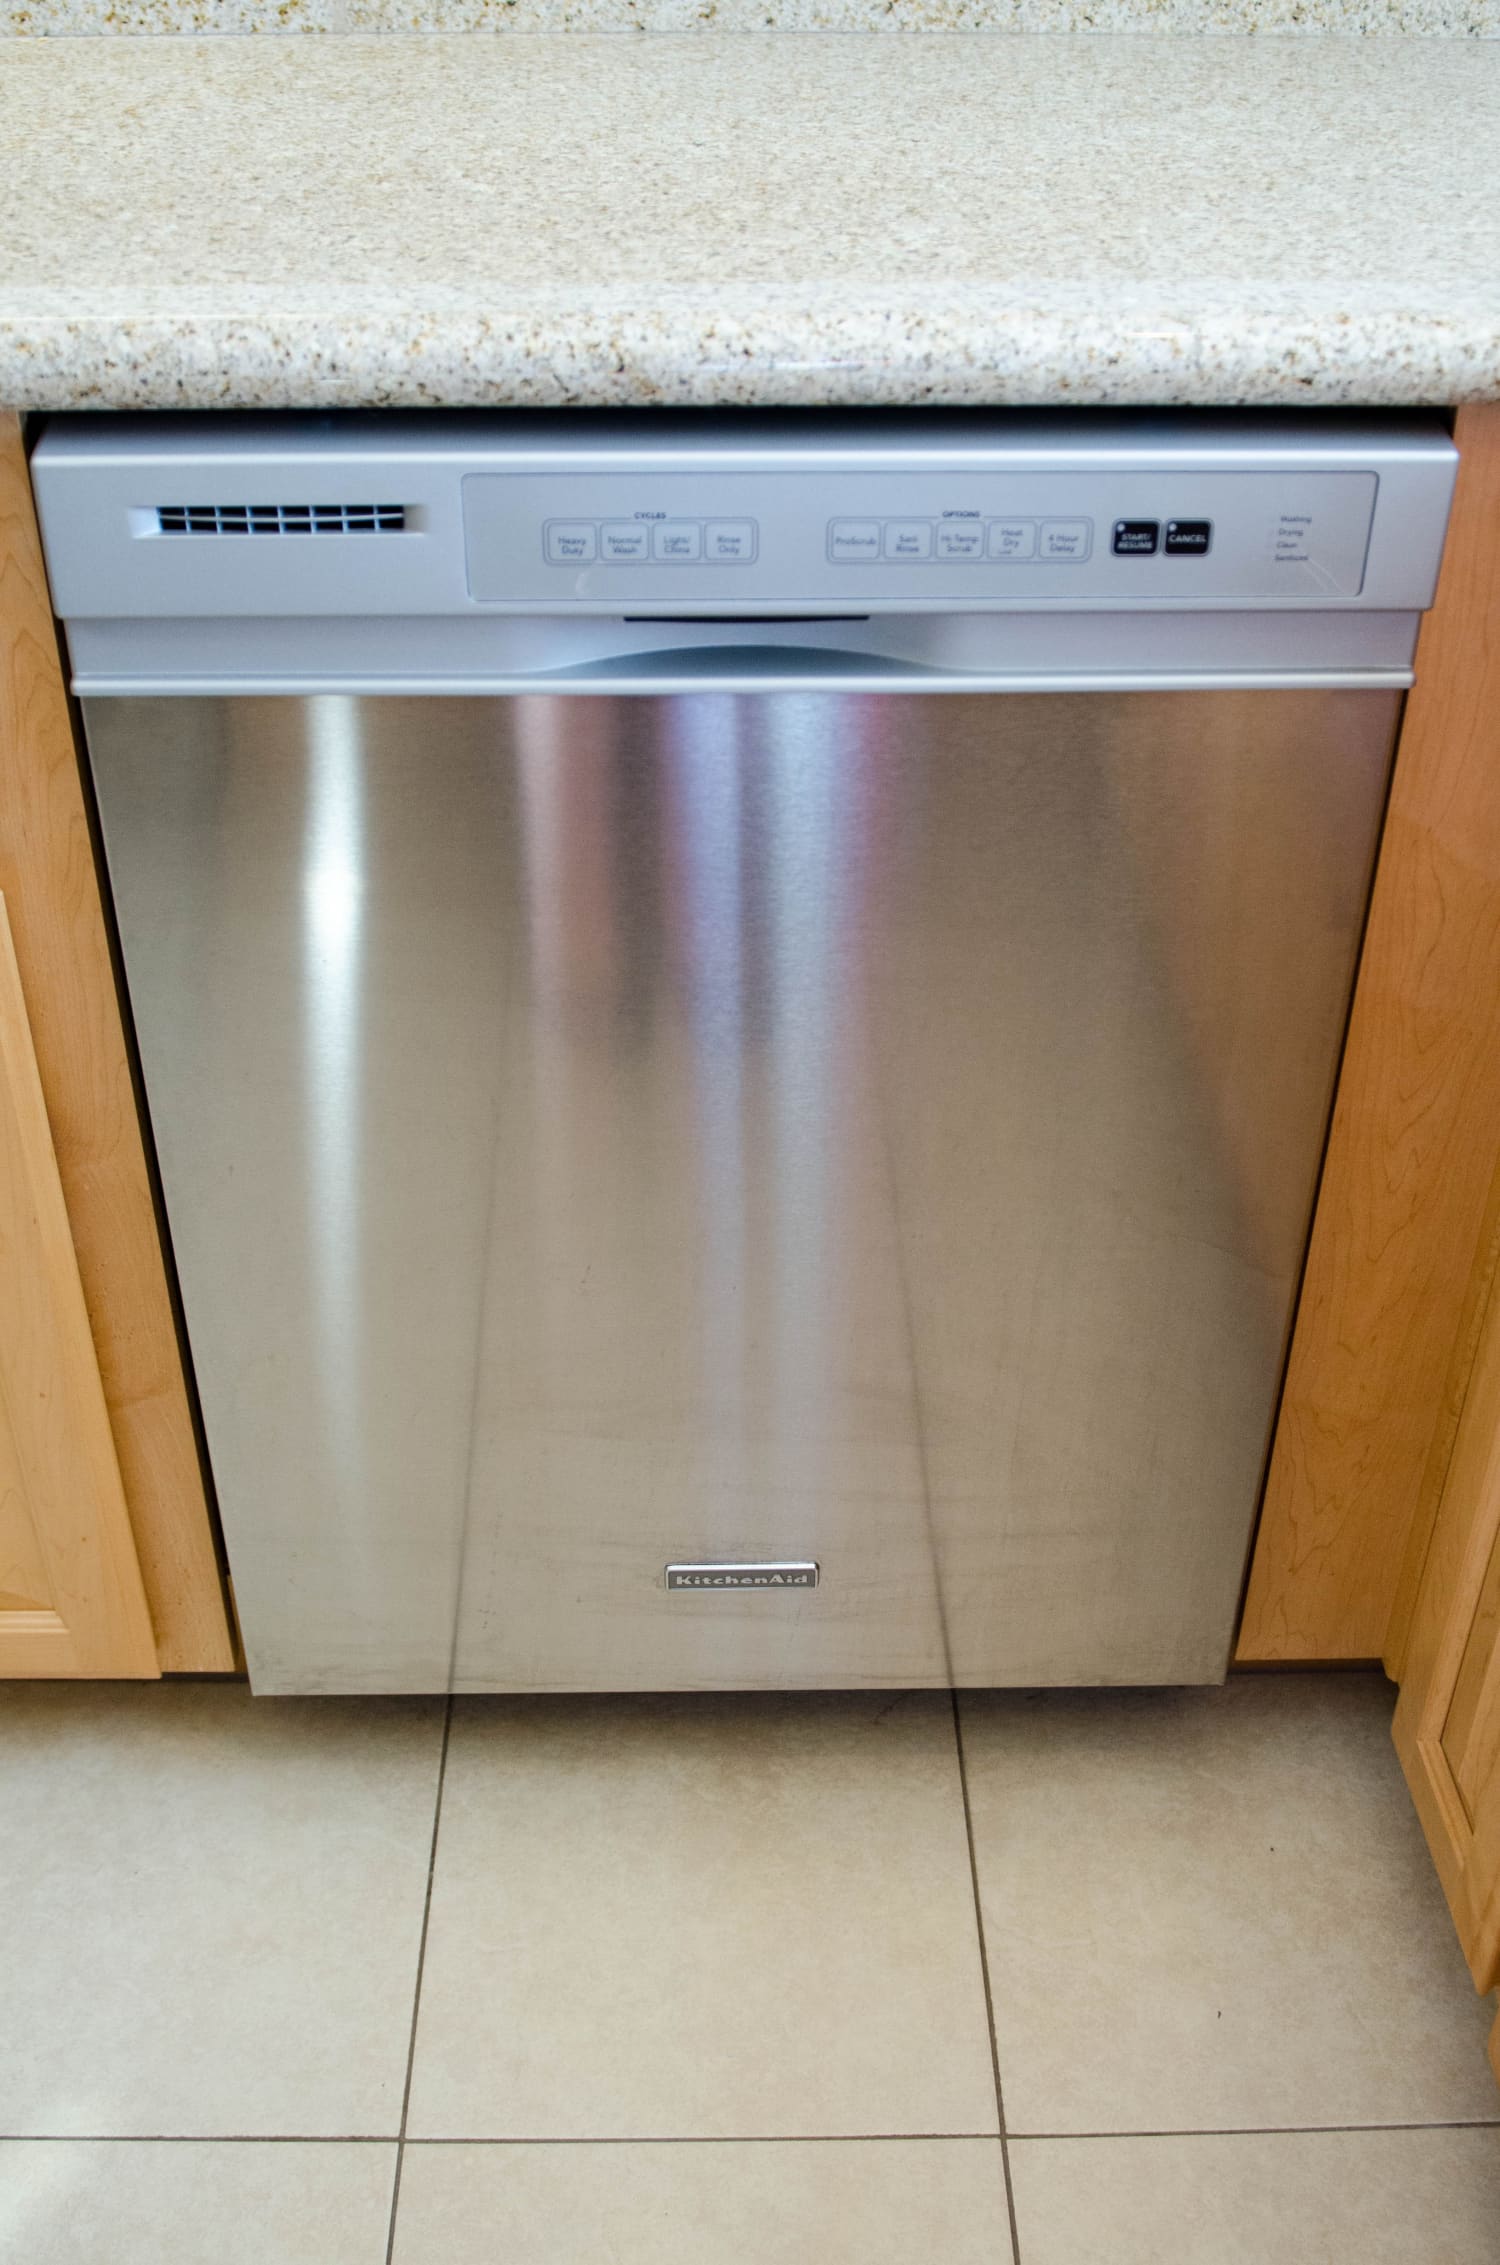 how much money does it cost to run a dishwasher